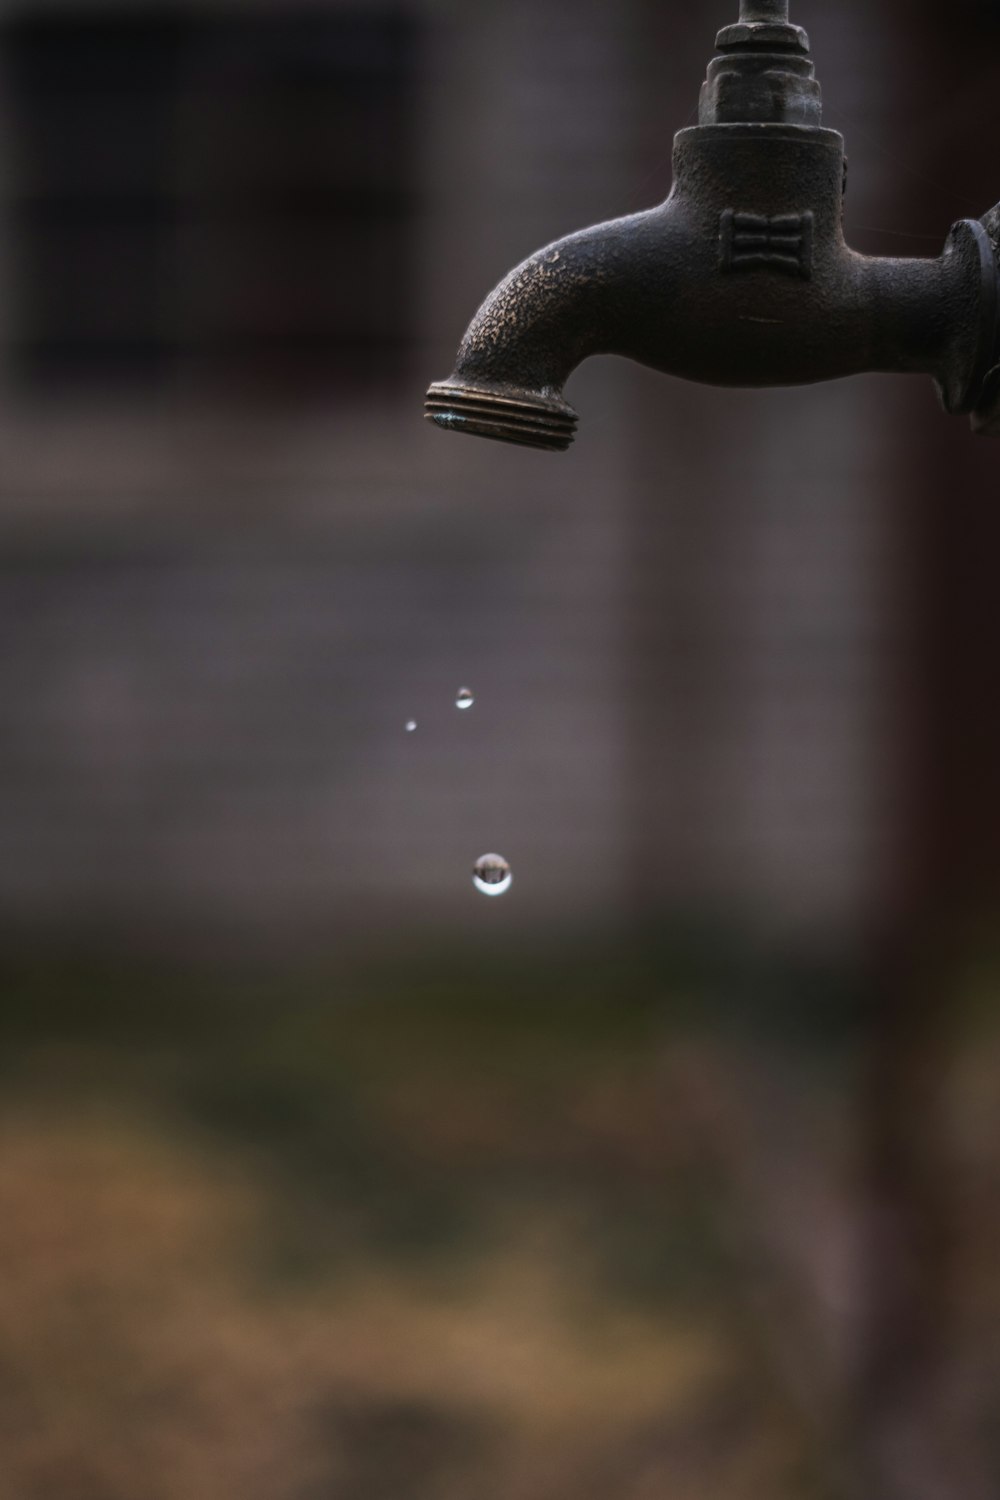 water dropping from faucet